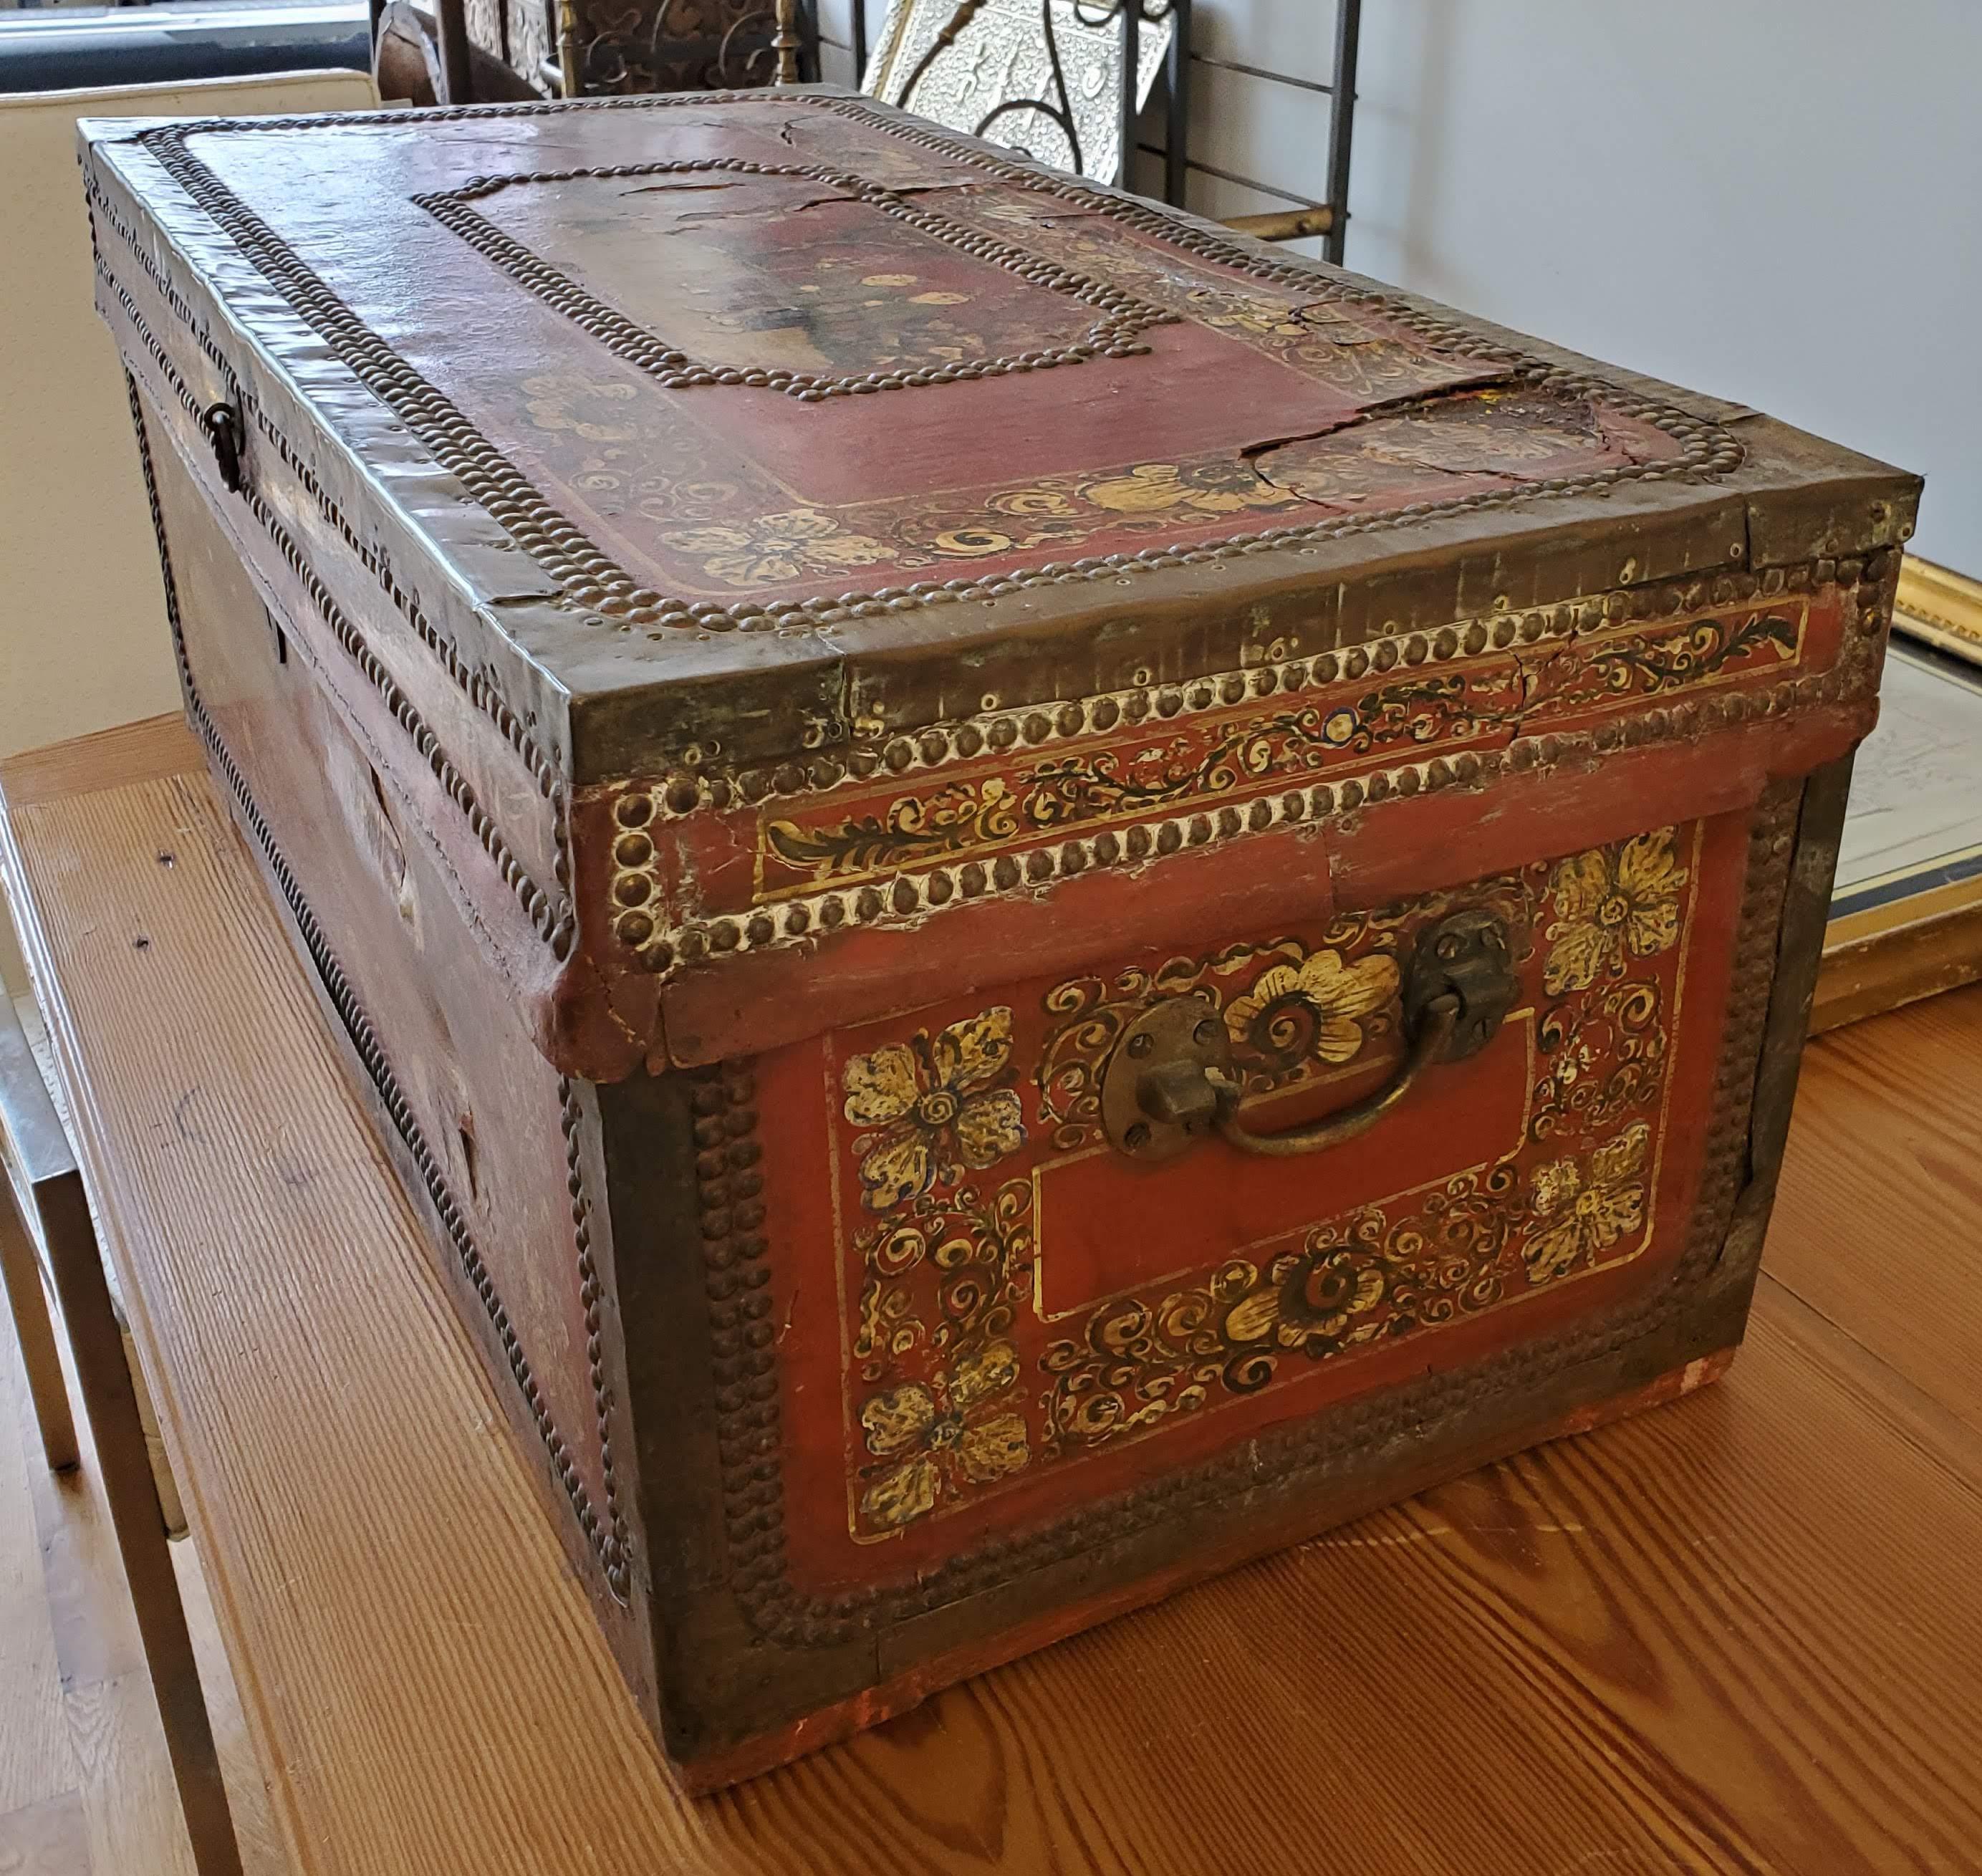 Hand-Painted 19th Century Chinese Export Brass Bound Leather Trunk with Hand Painted Designs